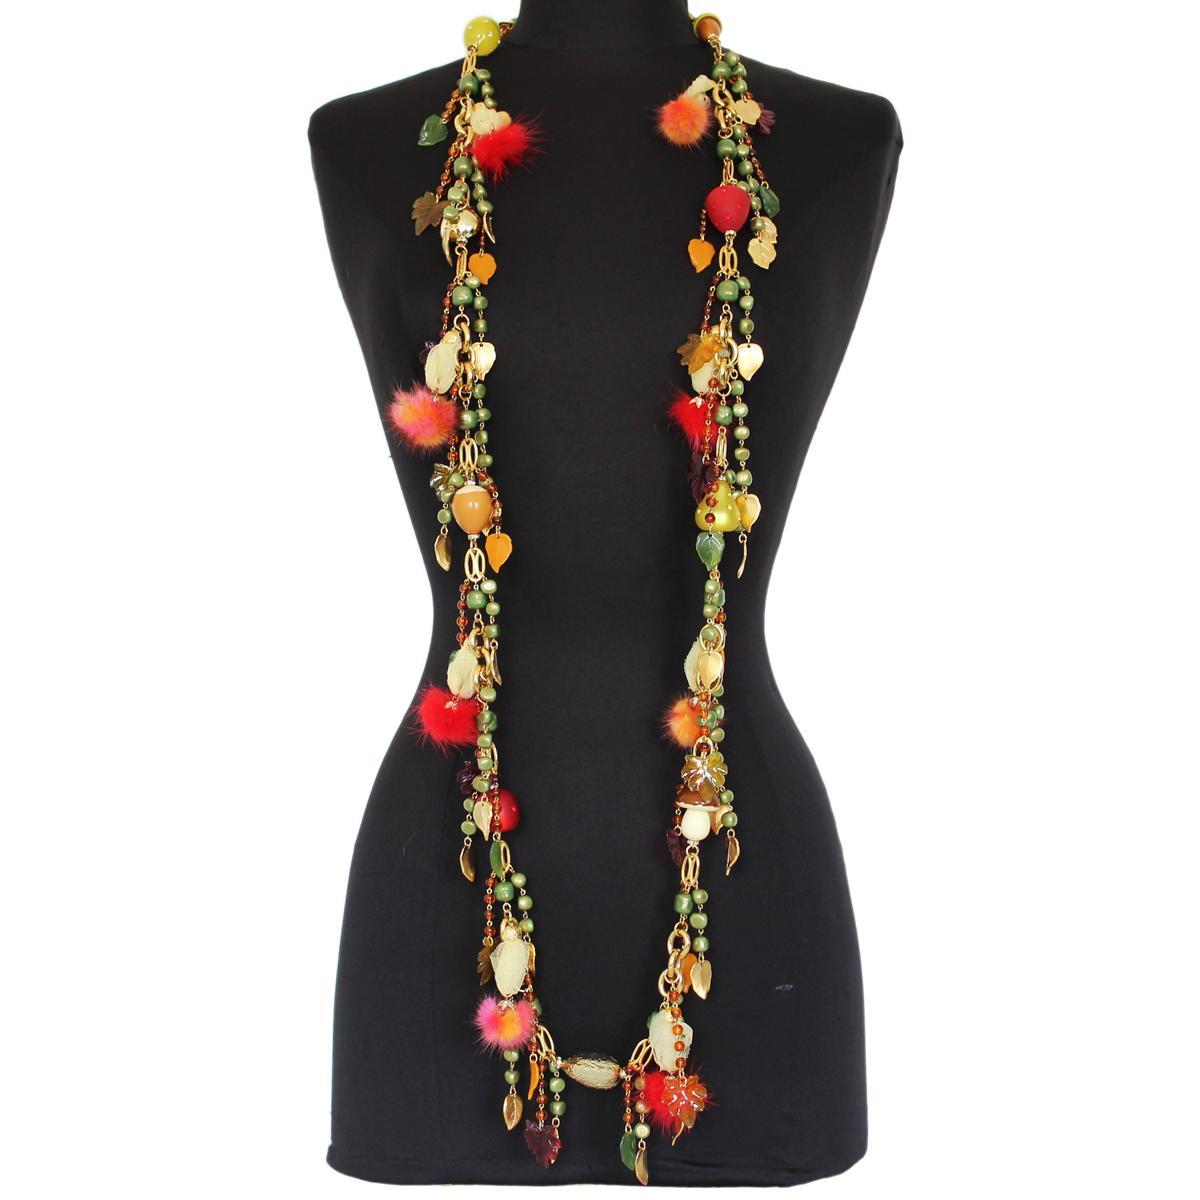 Fantastic masterpiece by Carlo Zini
One of the world greatest bijoux designers
Long necklace that can be worn in double round too
Stunning construction of autumn fruits elements linked in golden chain and adorned with swarovski crystals
Colored real